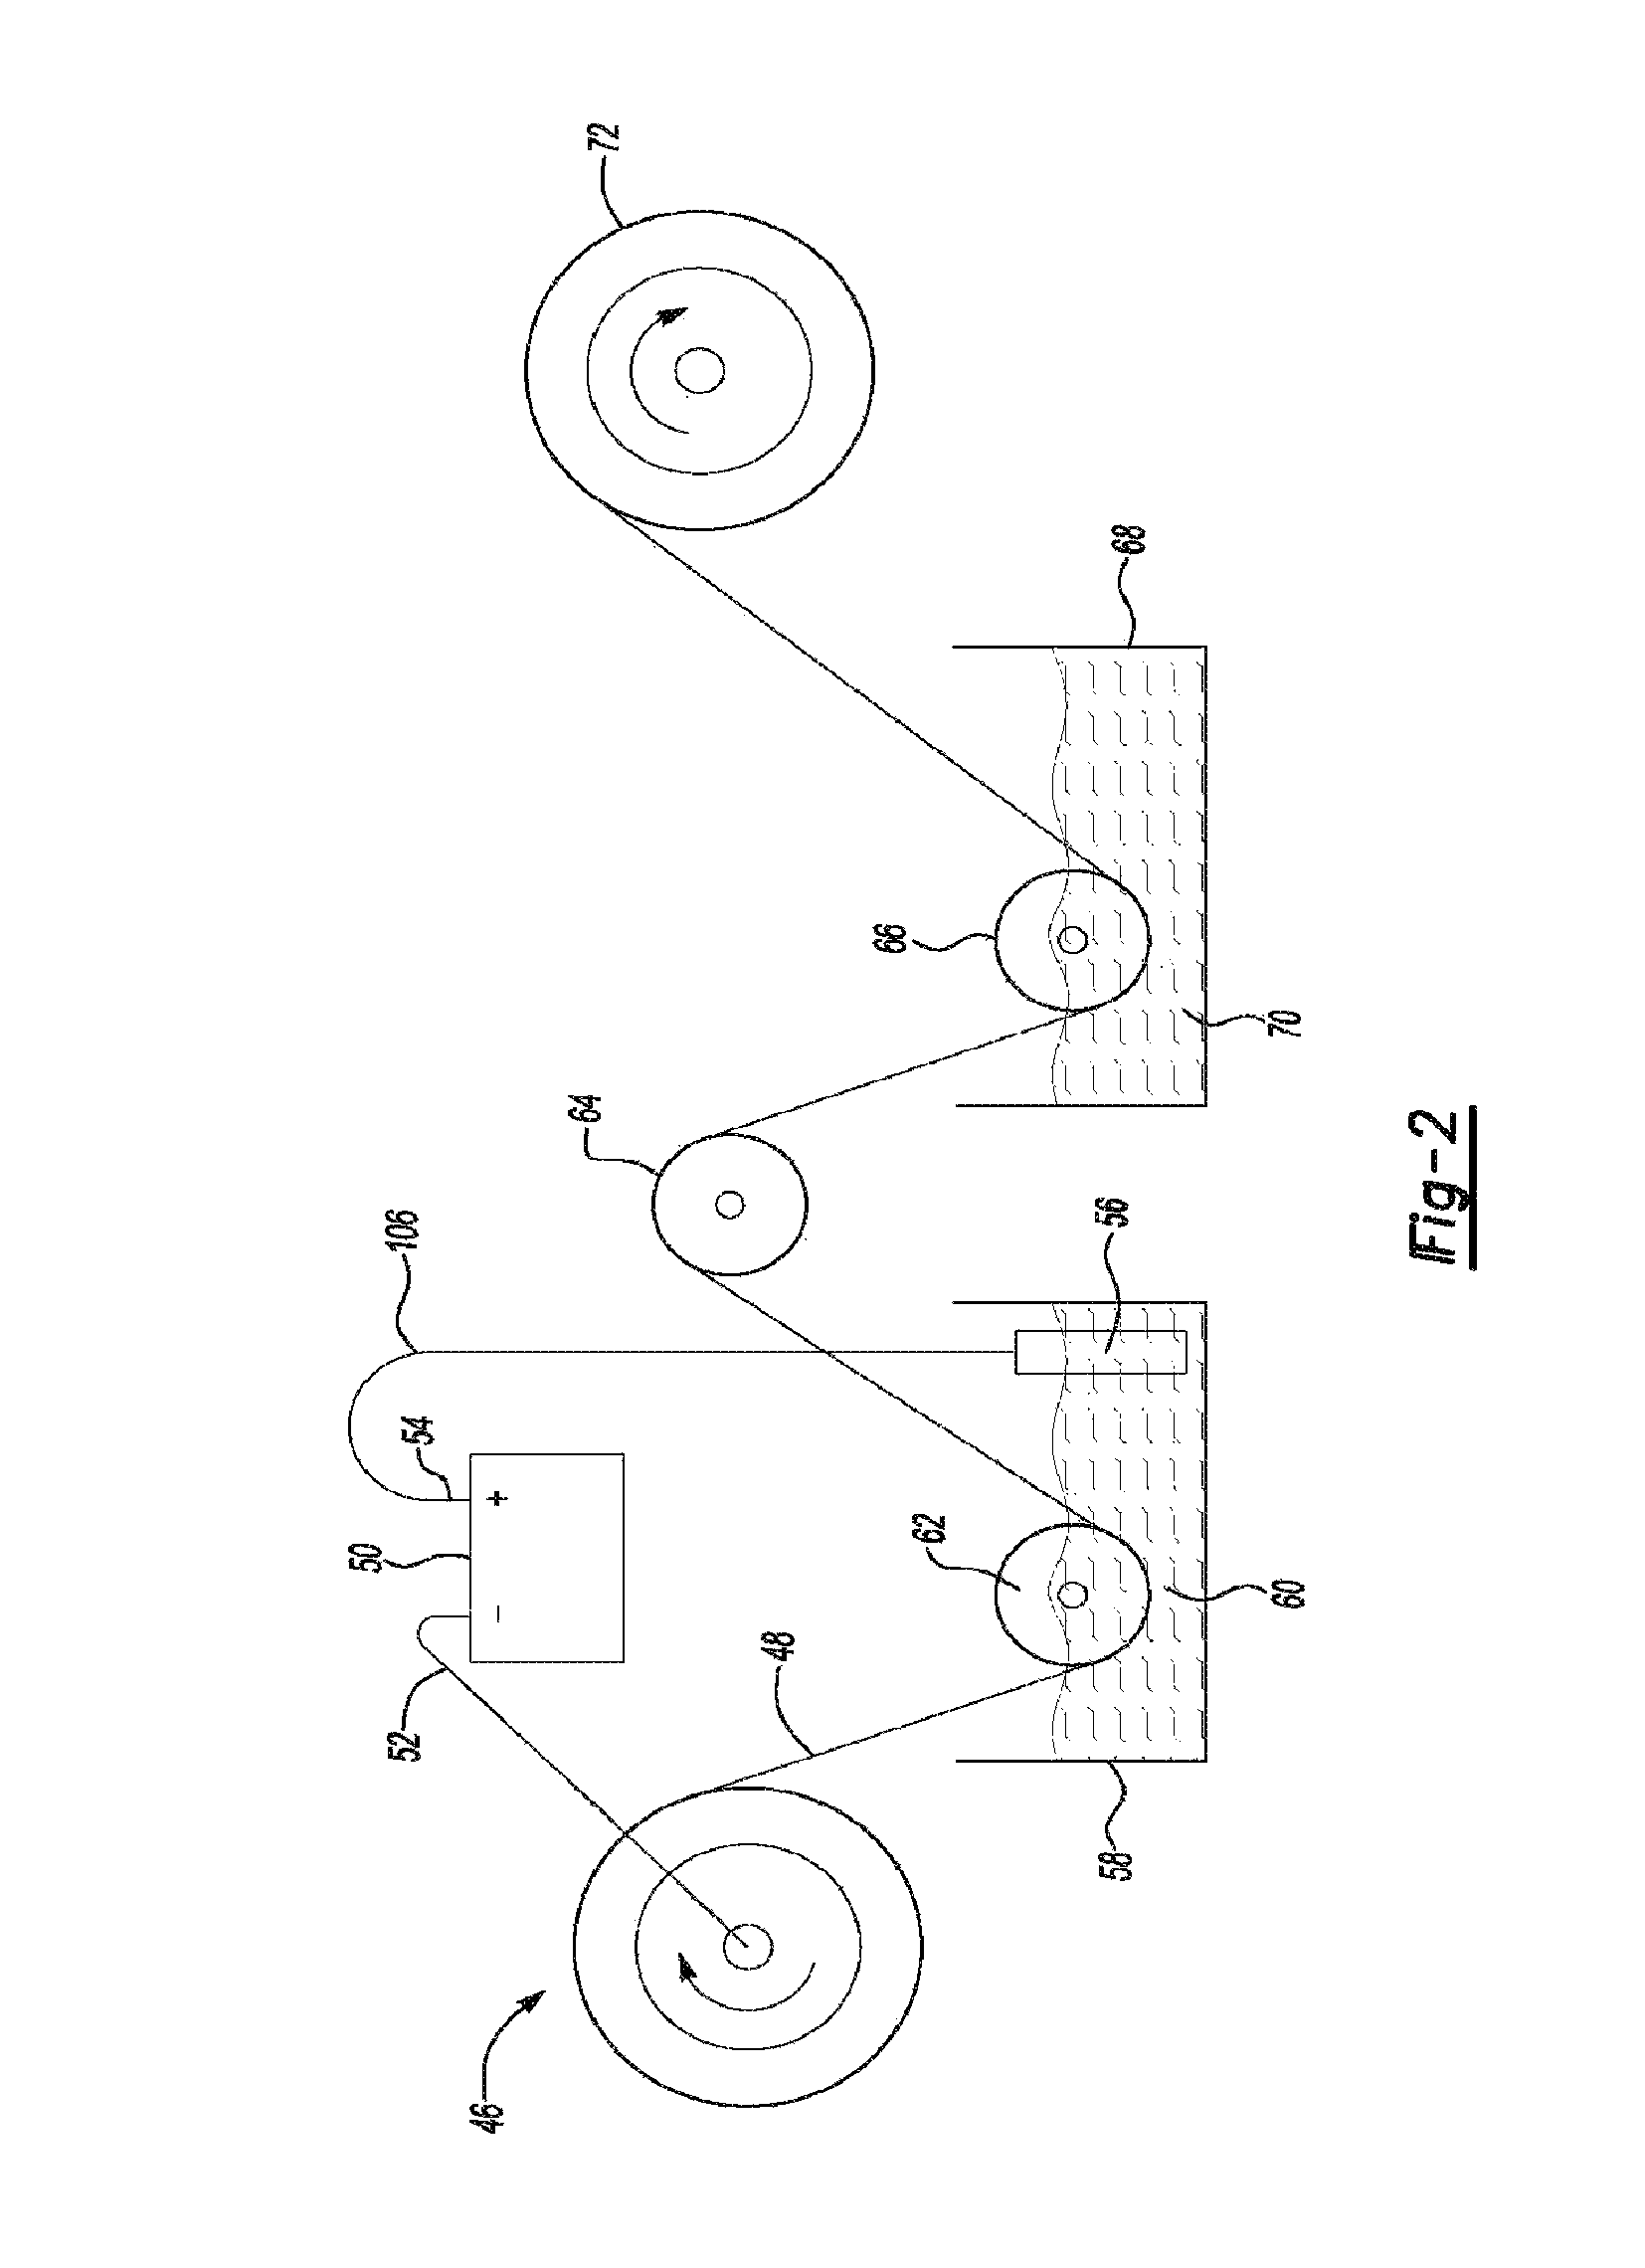 Insulated assembly of insulated electric conductors